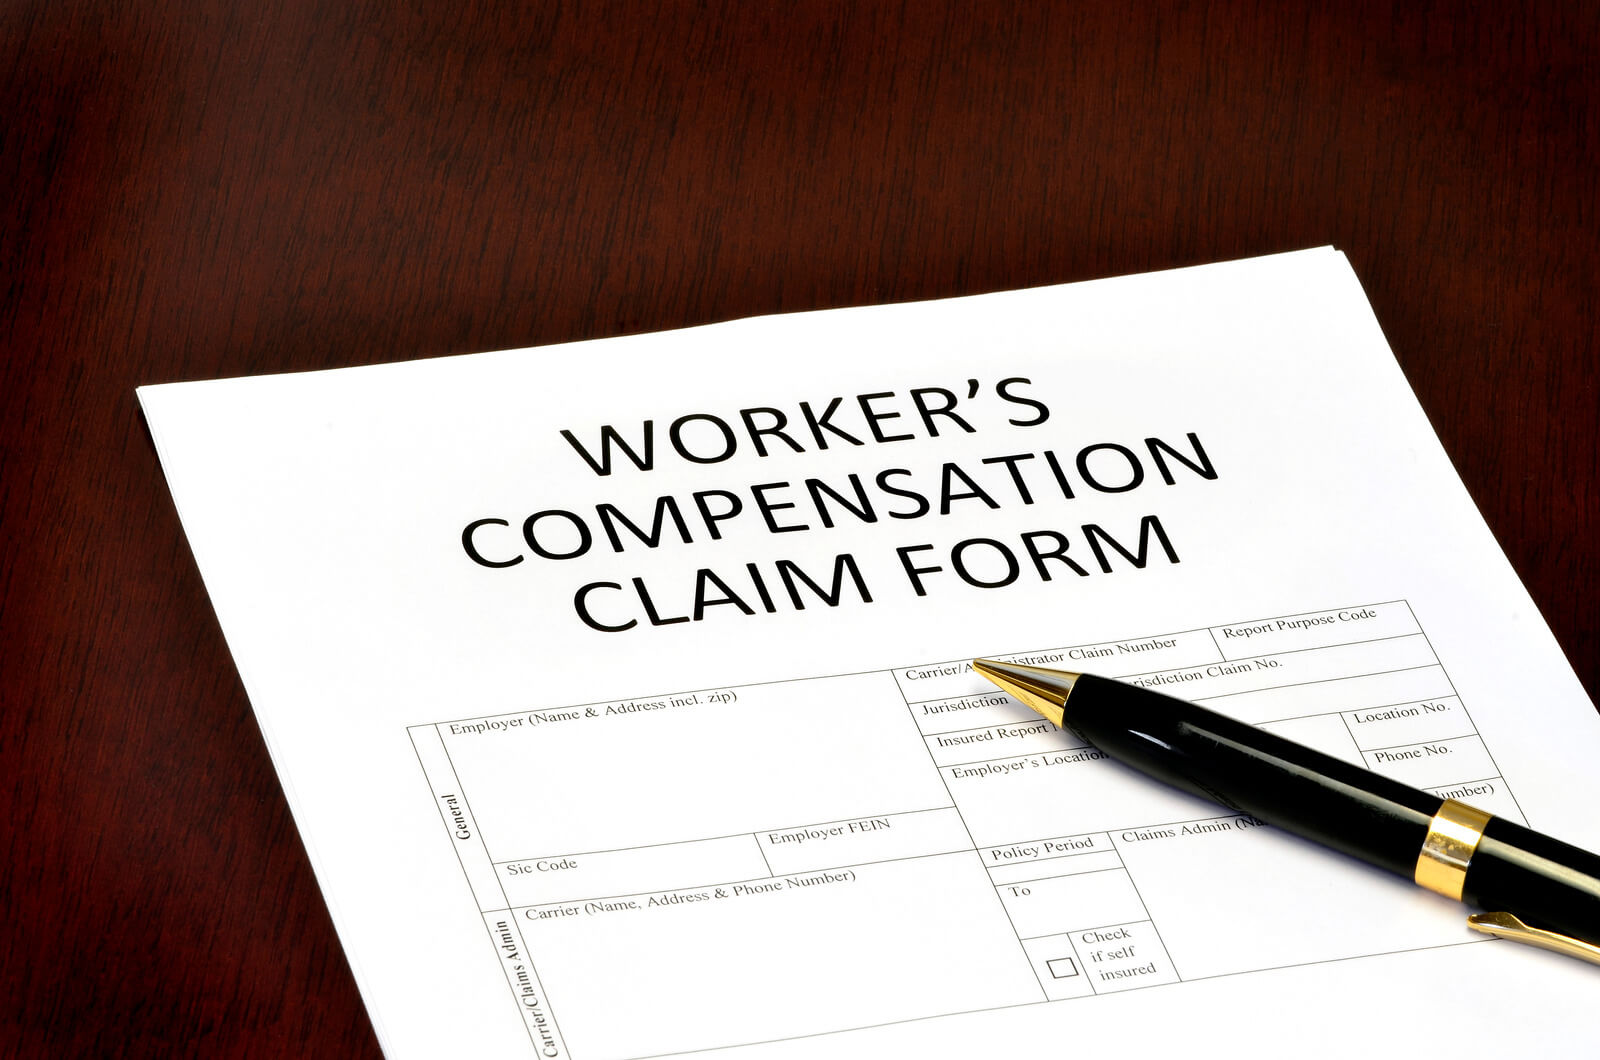 louisiana-workers-compensation-law-regulations-the-mahone-firm